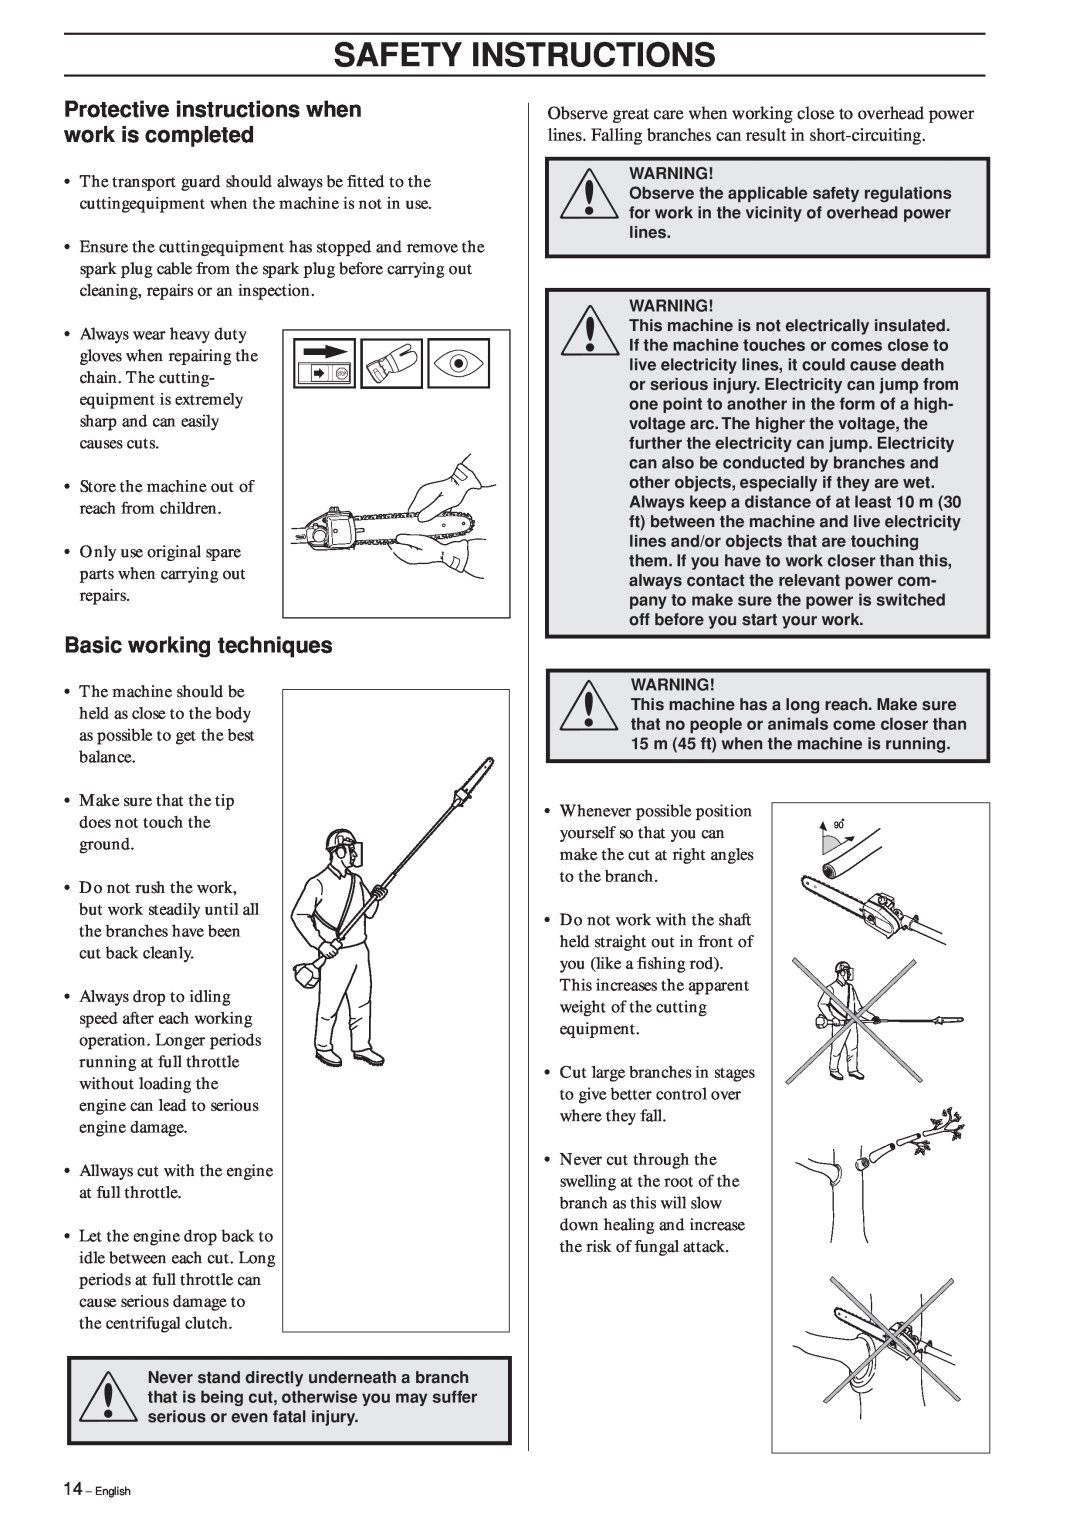 Husqvarna 323P4, 325P4 manual Protective instructions when work is completed, Basic working techniques, Safety Instructions 